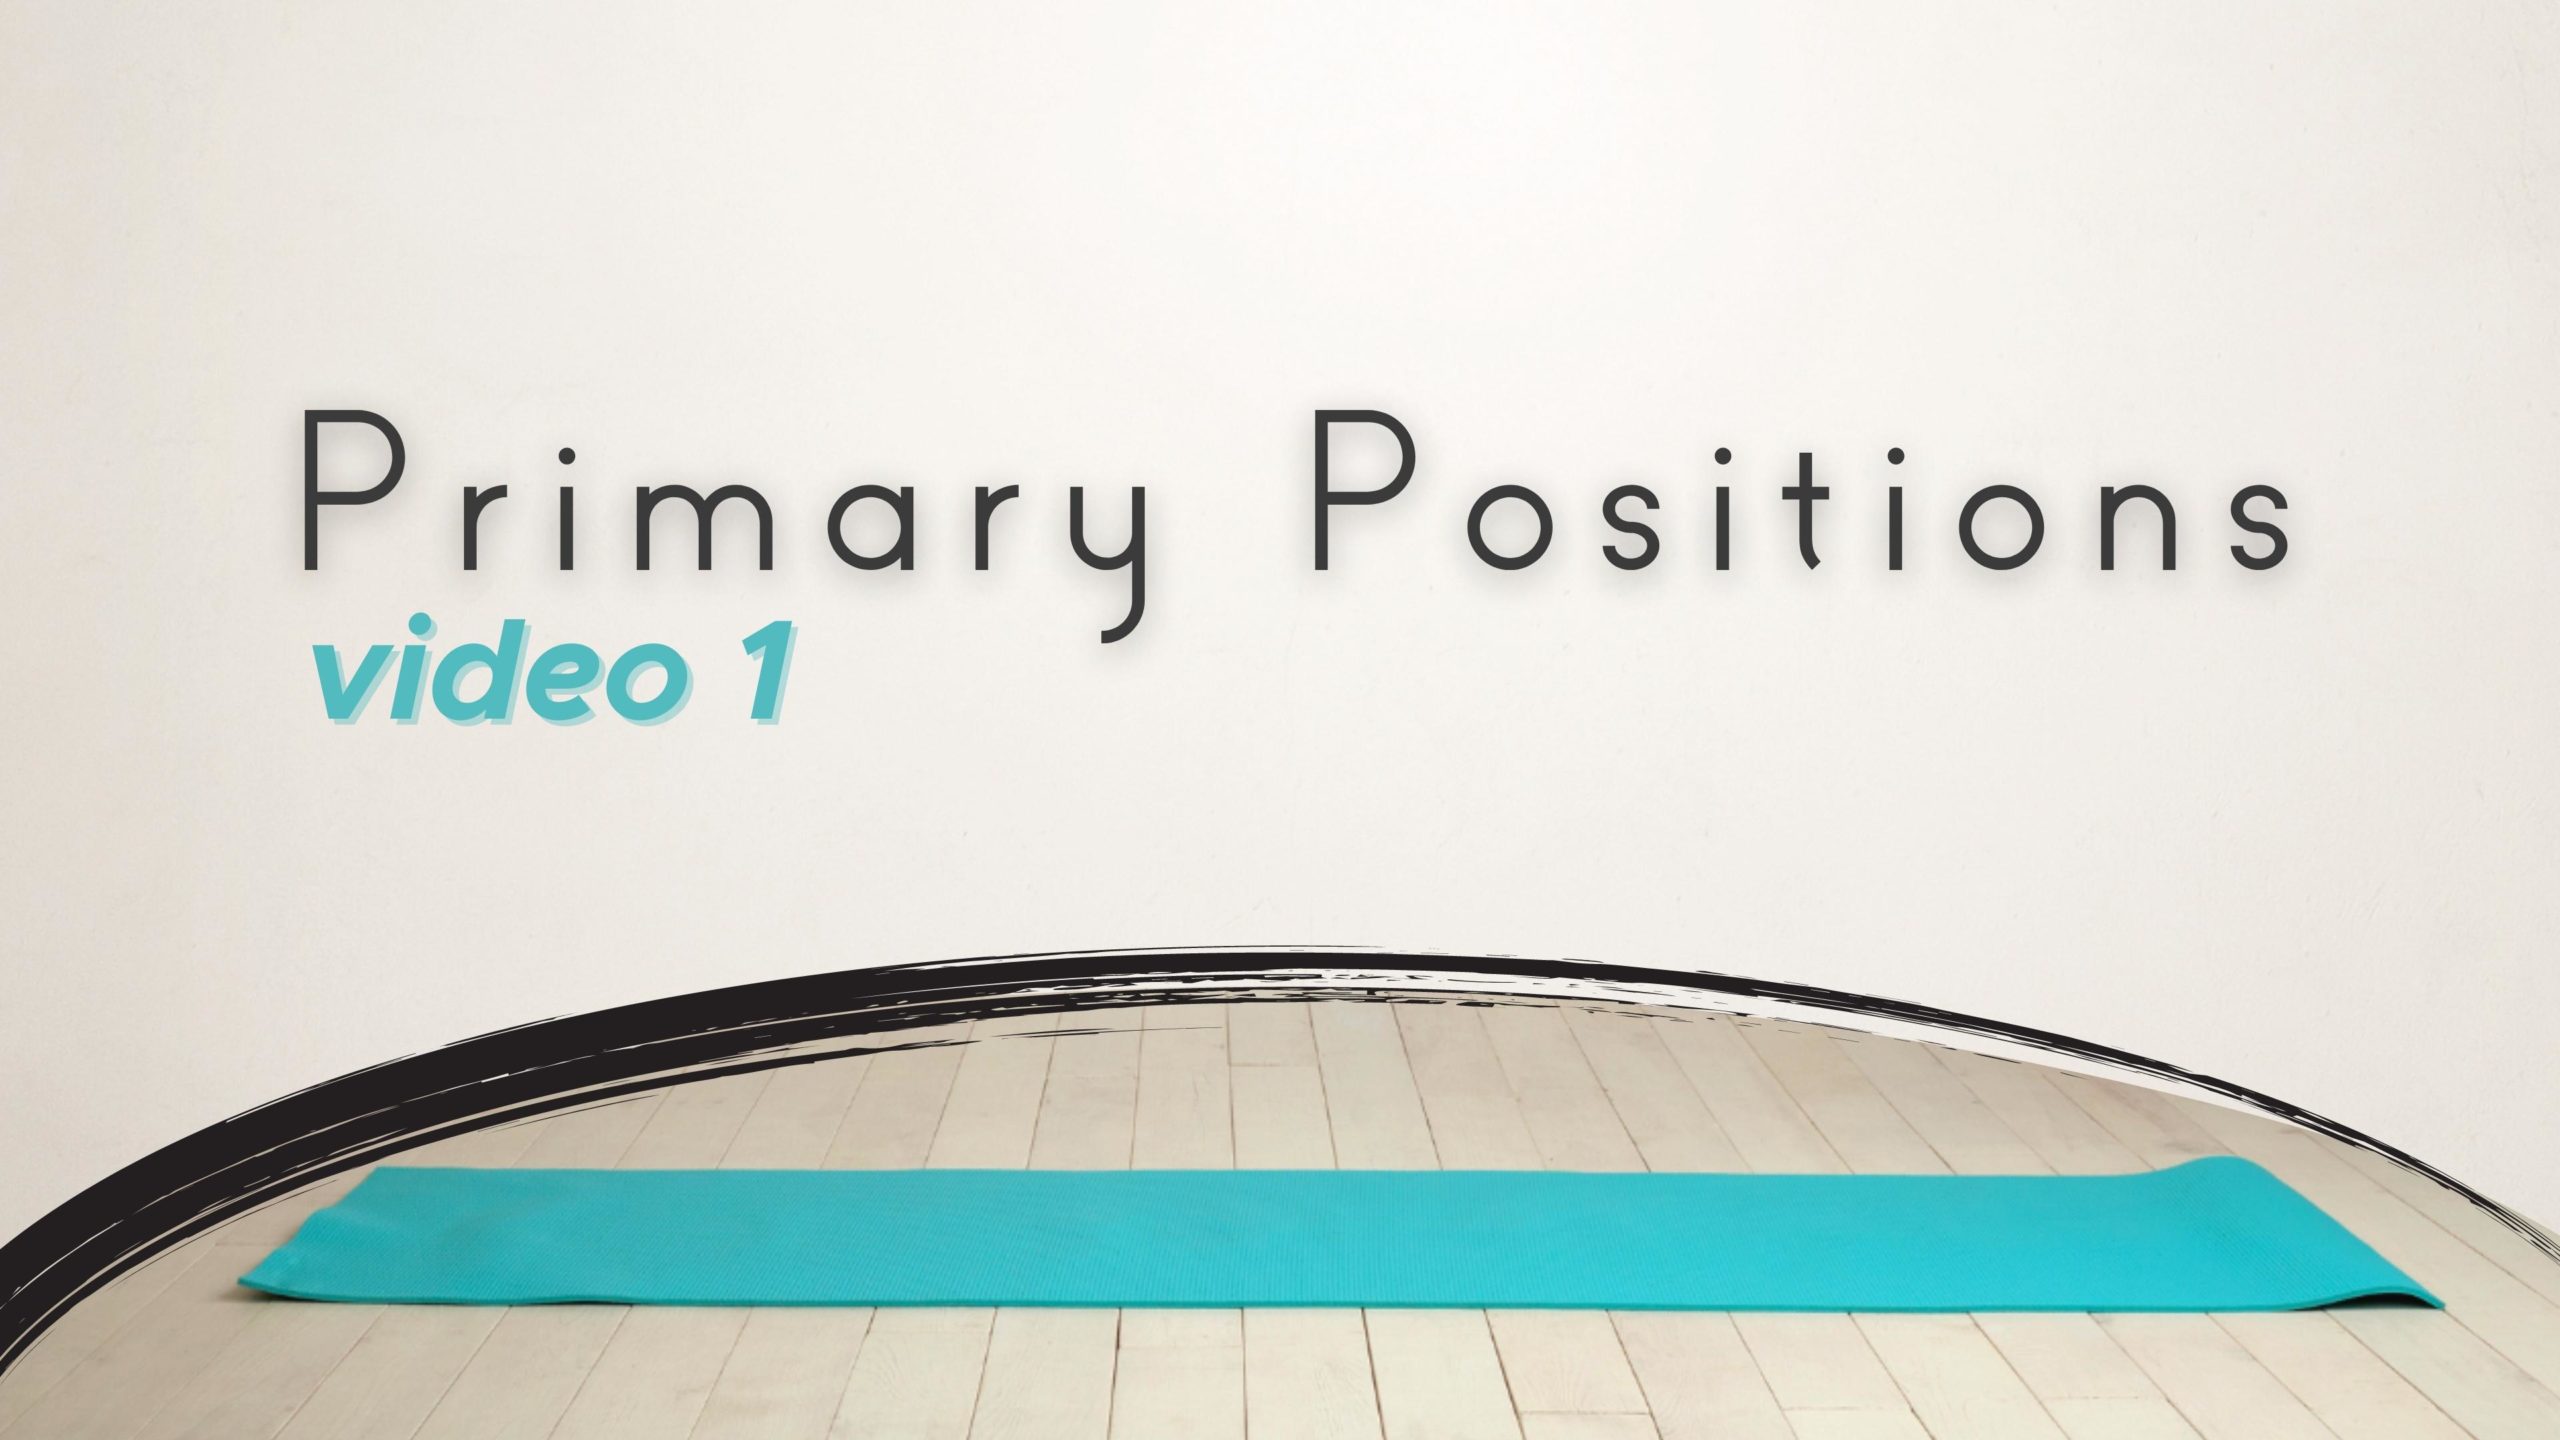 Primary Positions Video 1